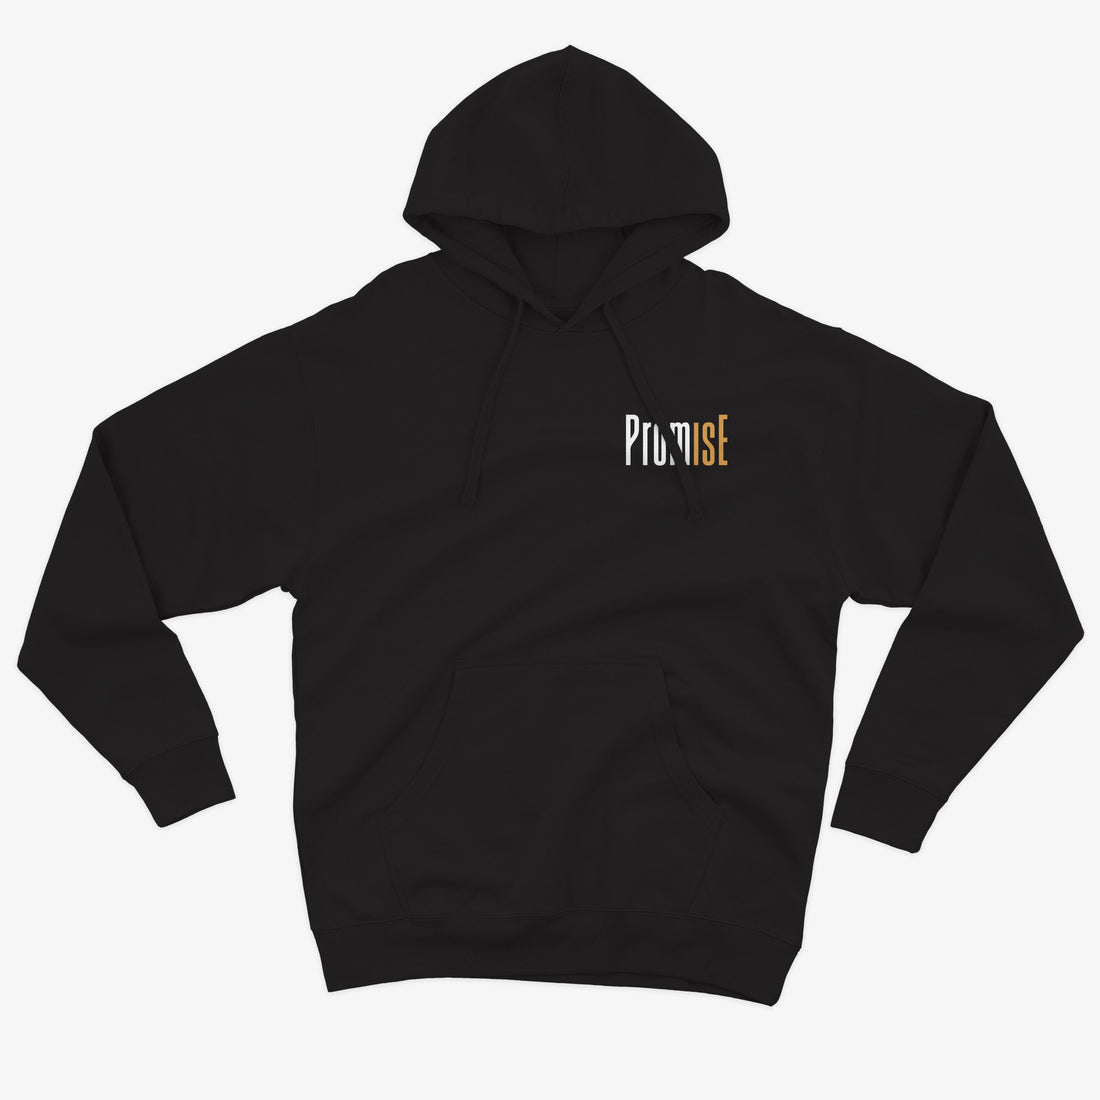 Promise Unisex Classic Hoodie - Blessing Clothing